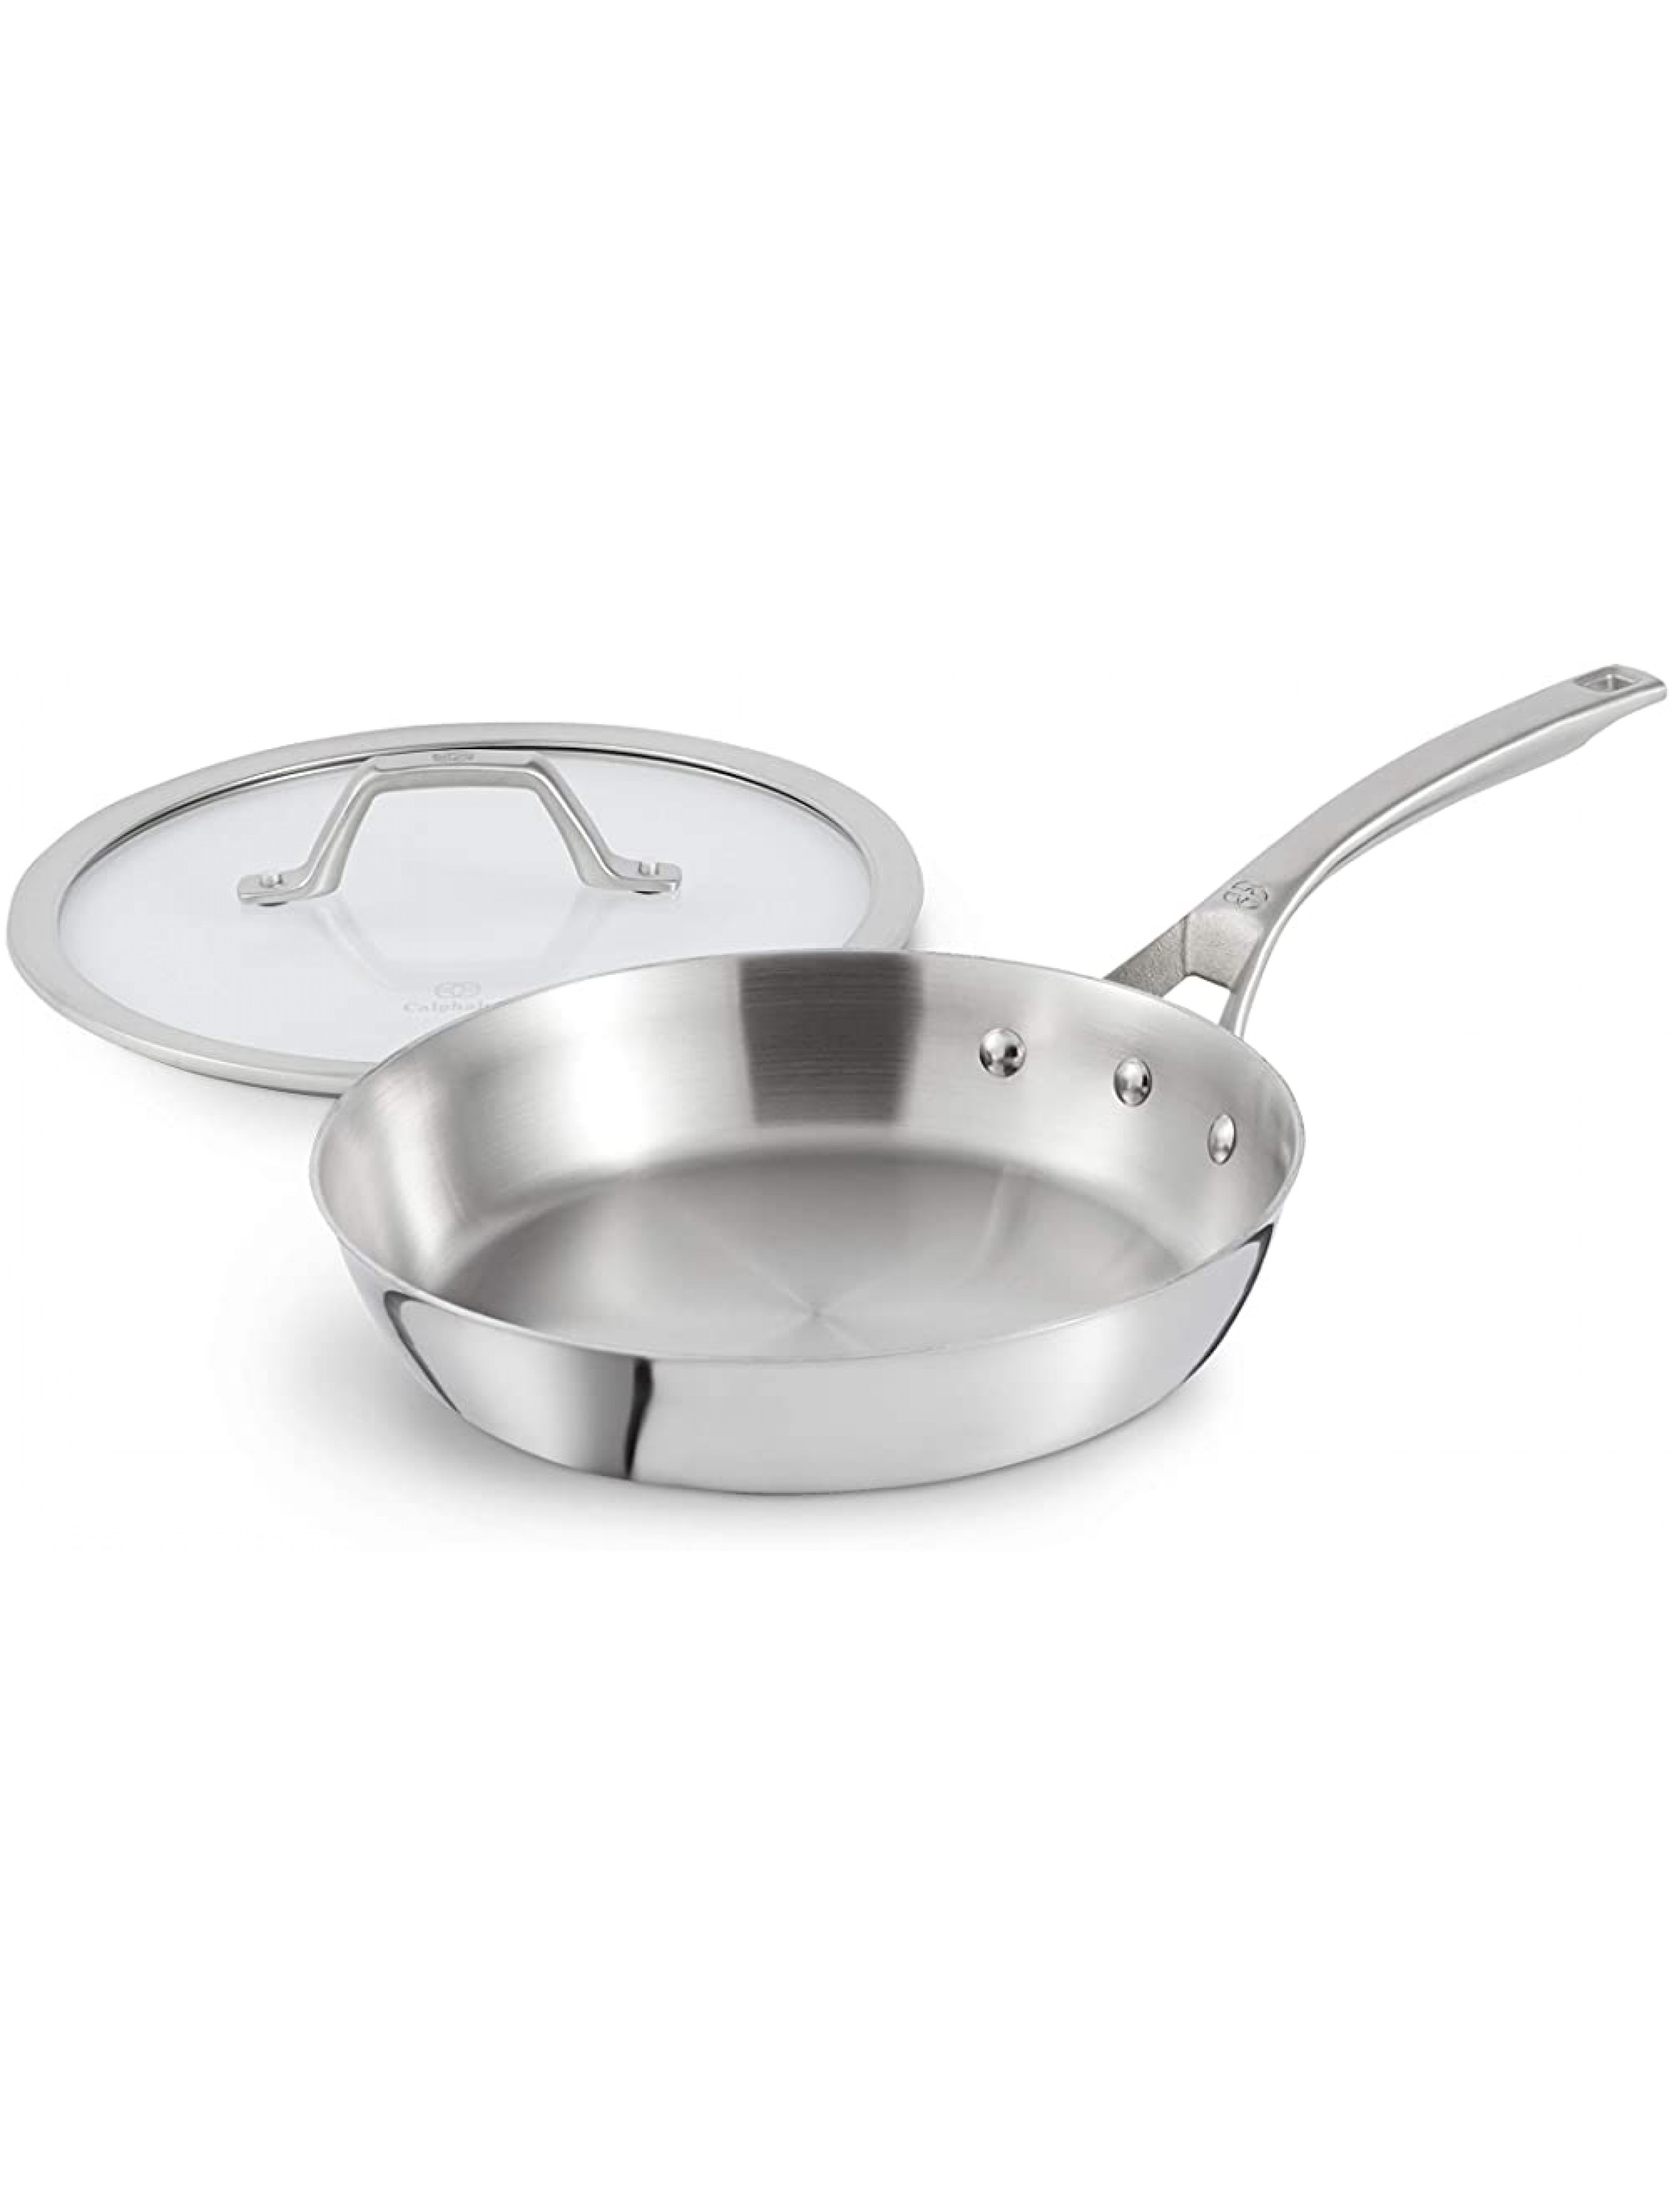 Calphalon Signature Stainless Steel 10-Inch Skillet Pan with Cover - BS8QO2BM8